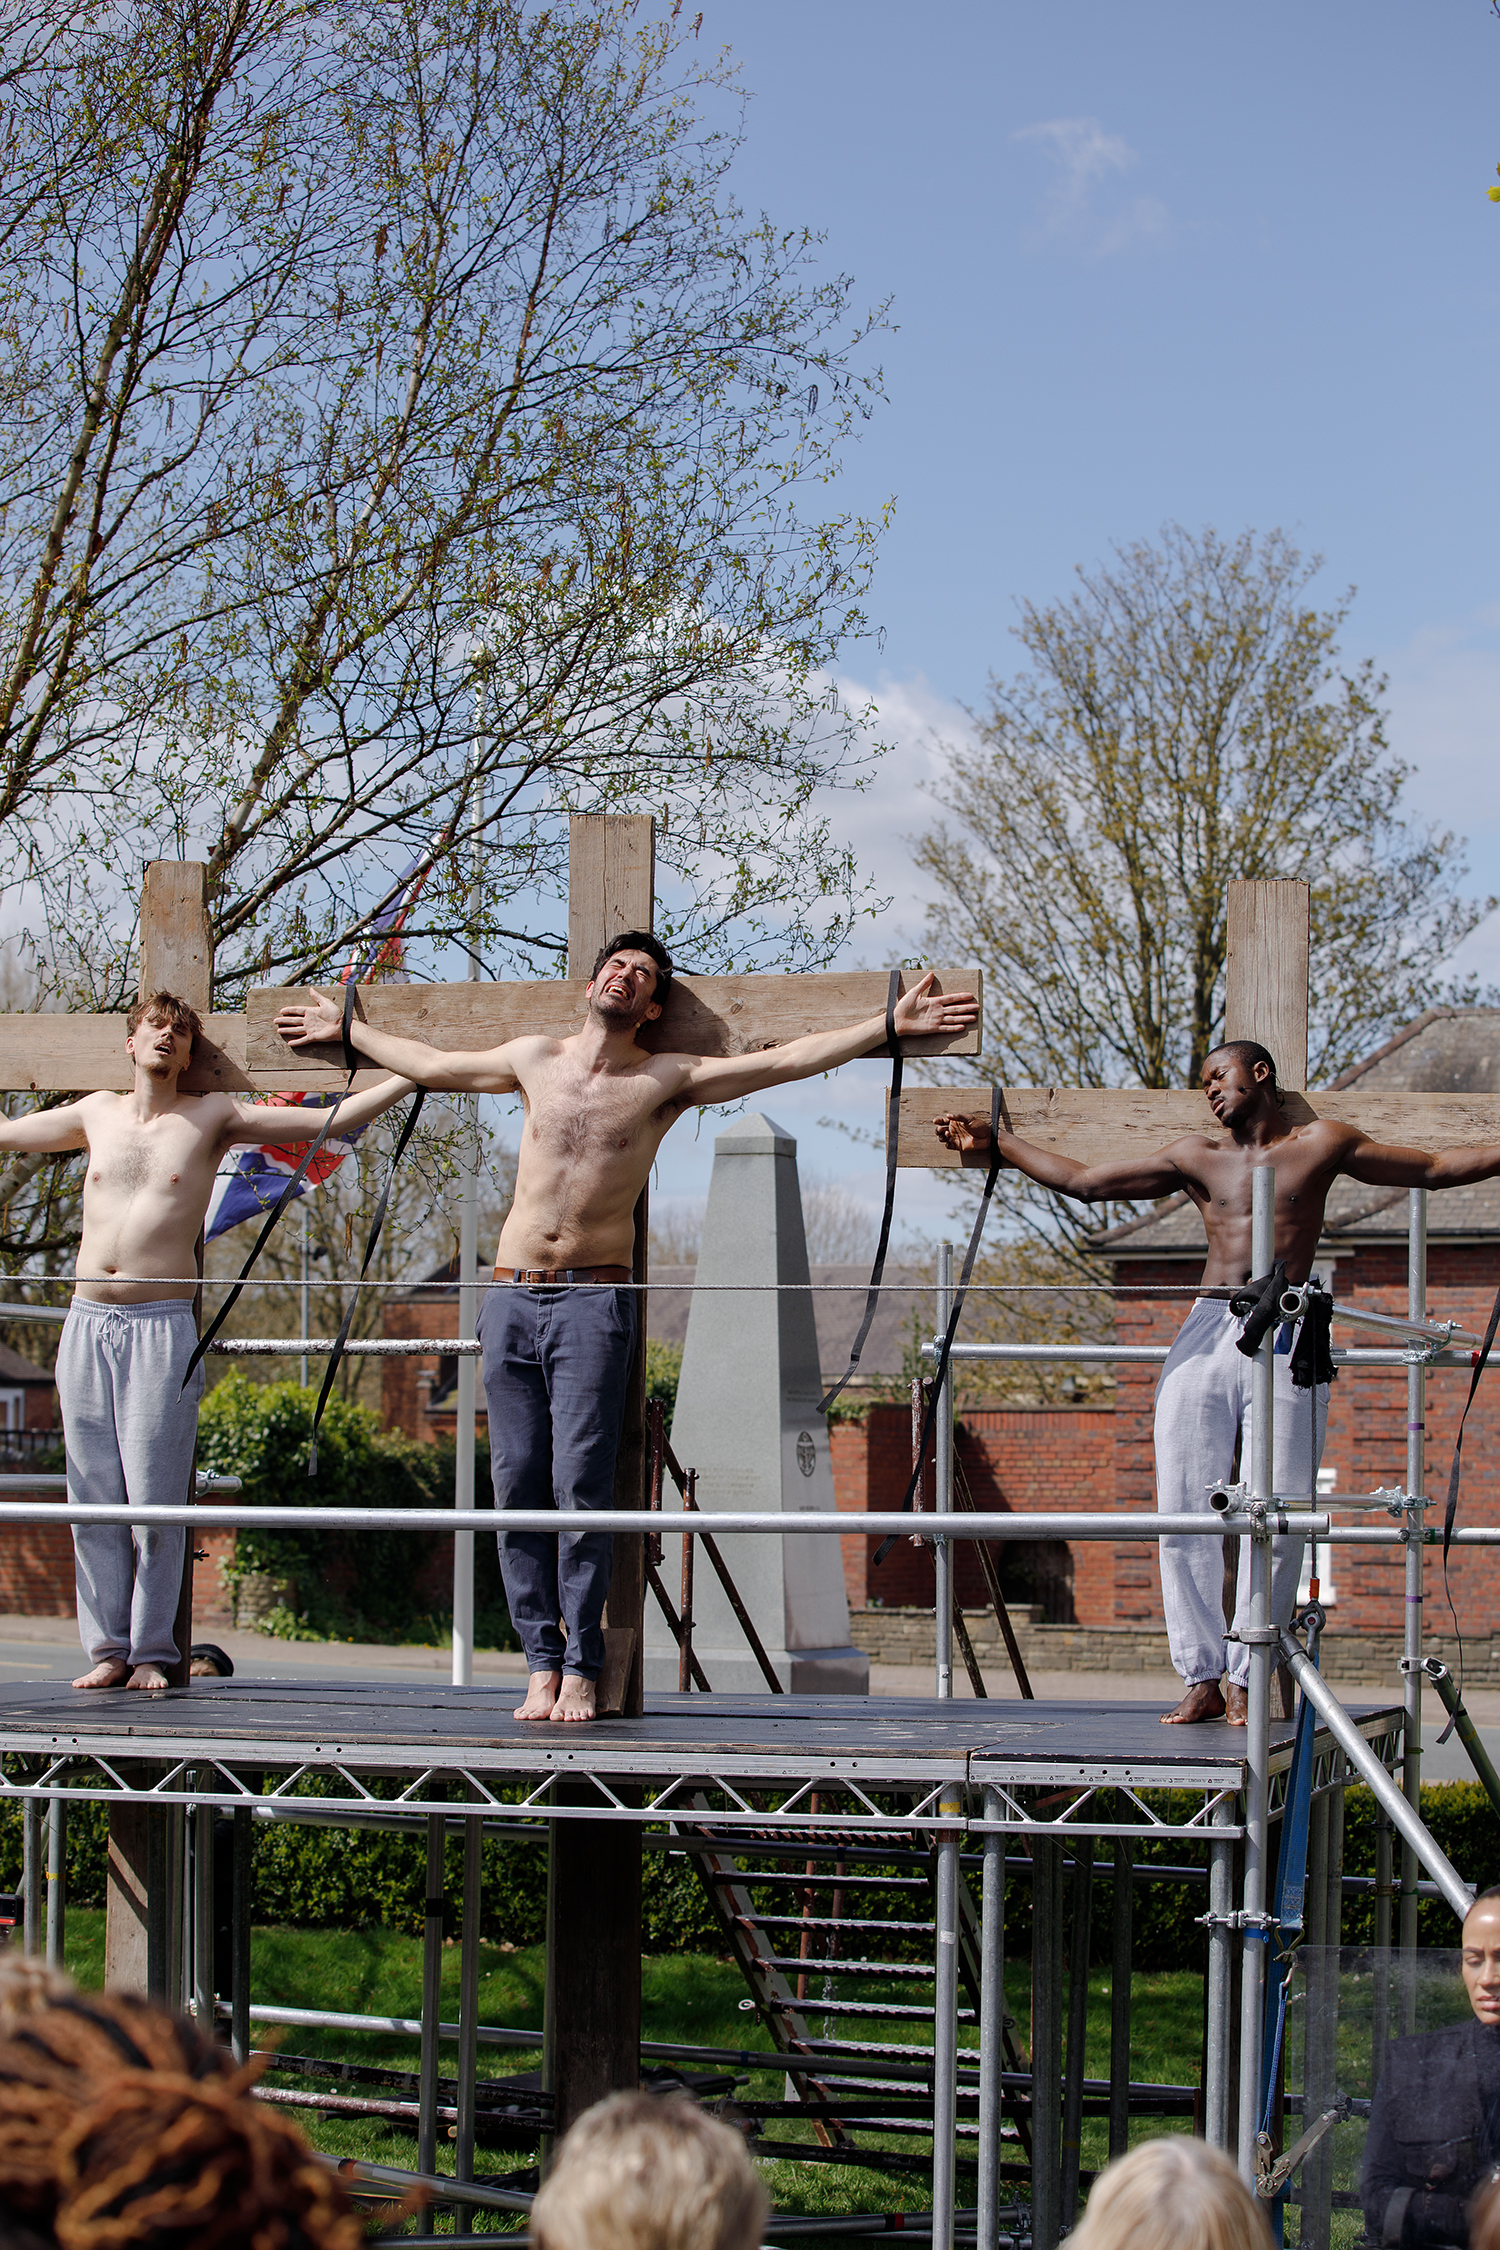 Crucifixion scene at Dudley passion play